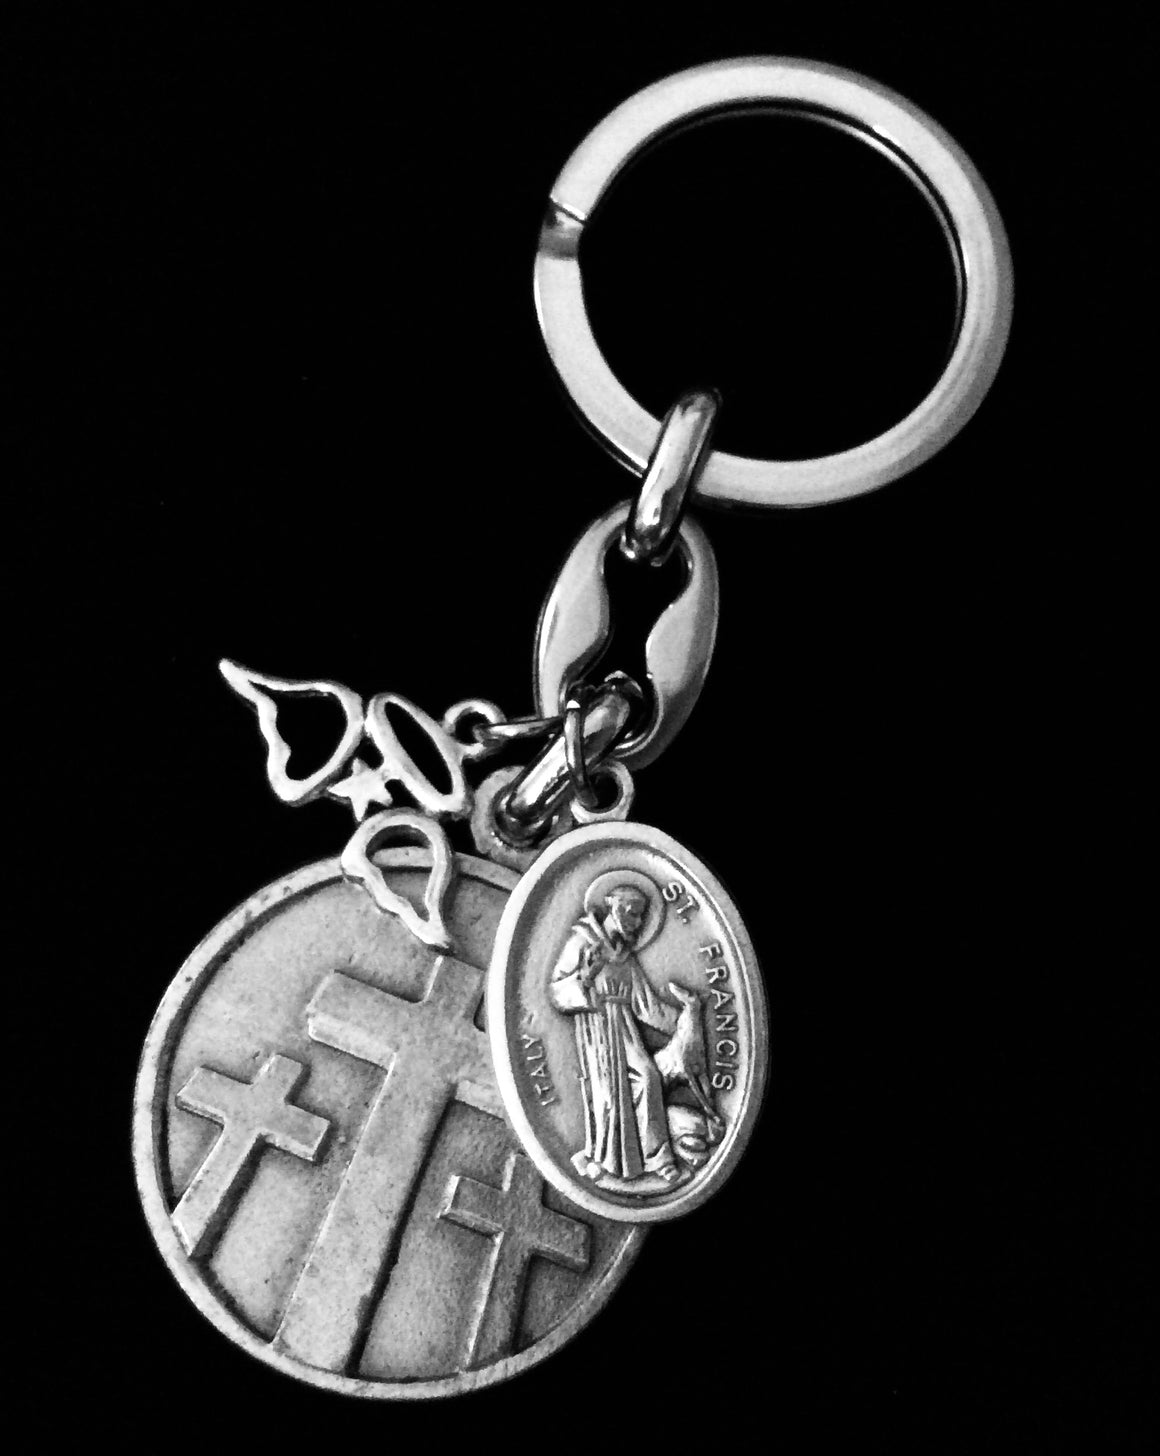 Memorial Key Chain Saint Francis Saint Anthony FOB Keychain Medal Silver Key Ring Gift Inspirational Jewelry Angel Wings A Tear Lost But Never Forgotten